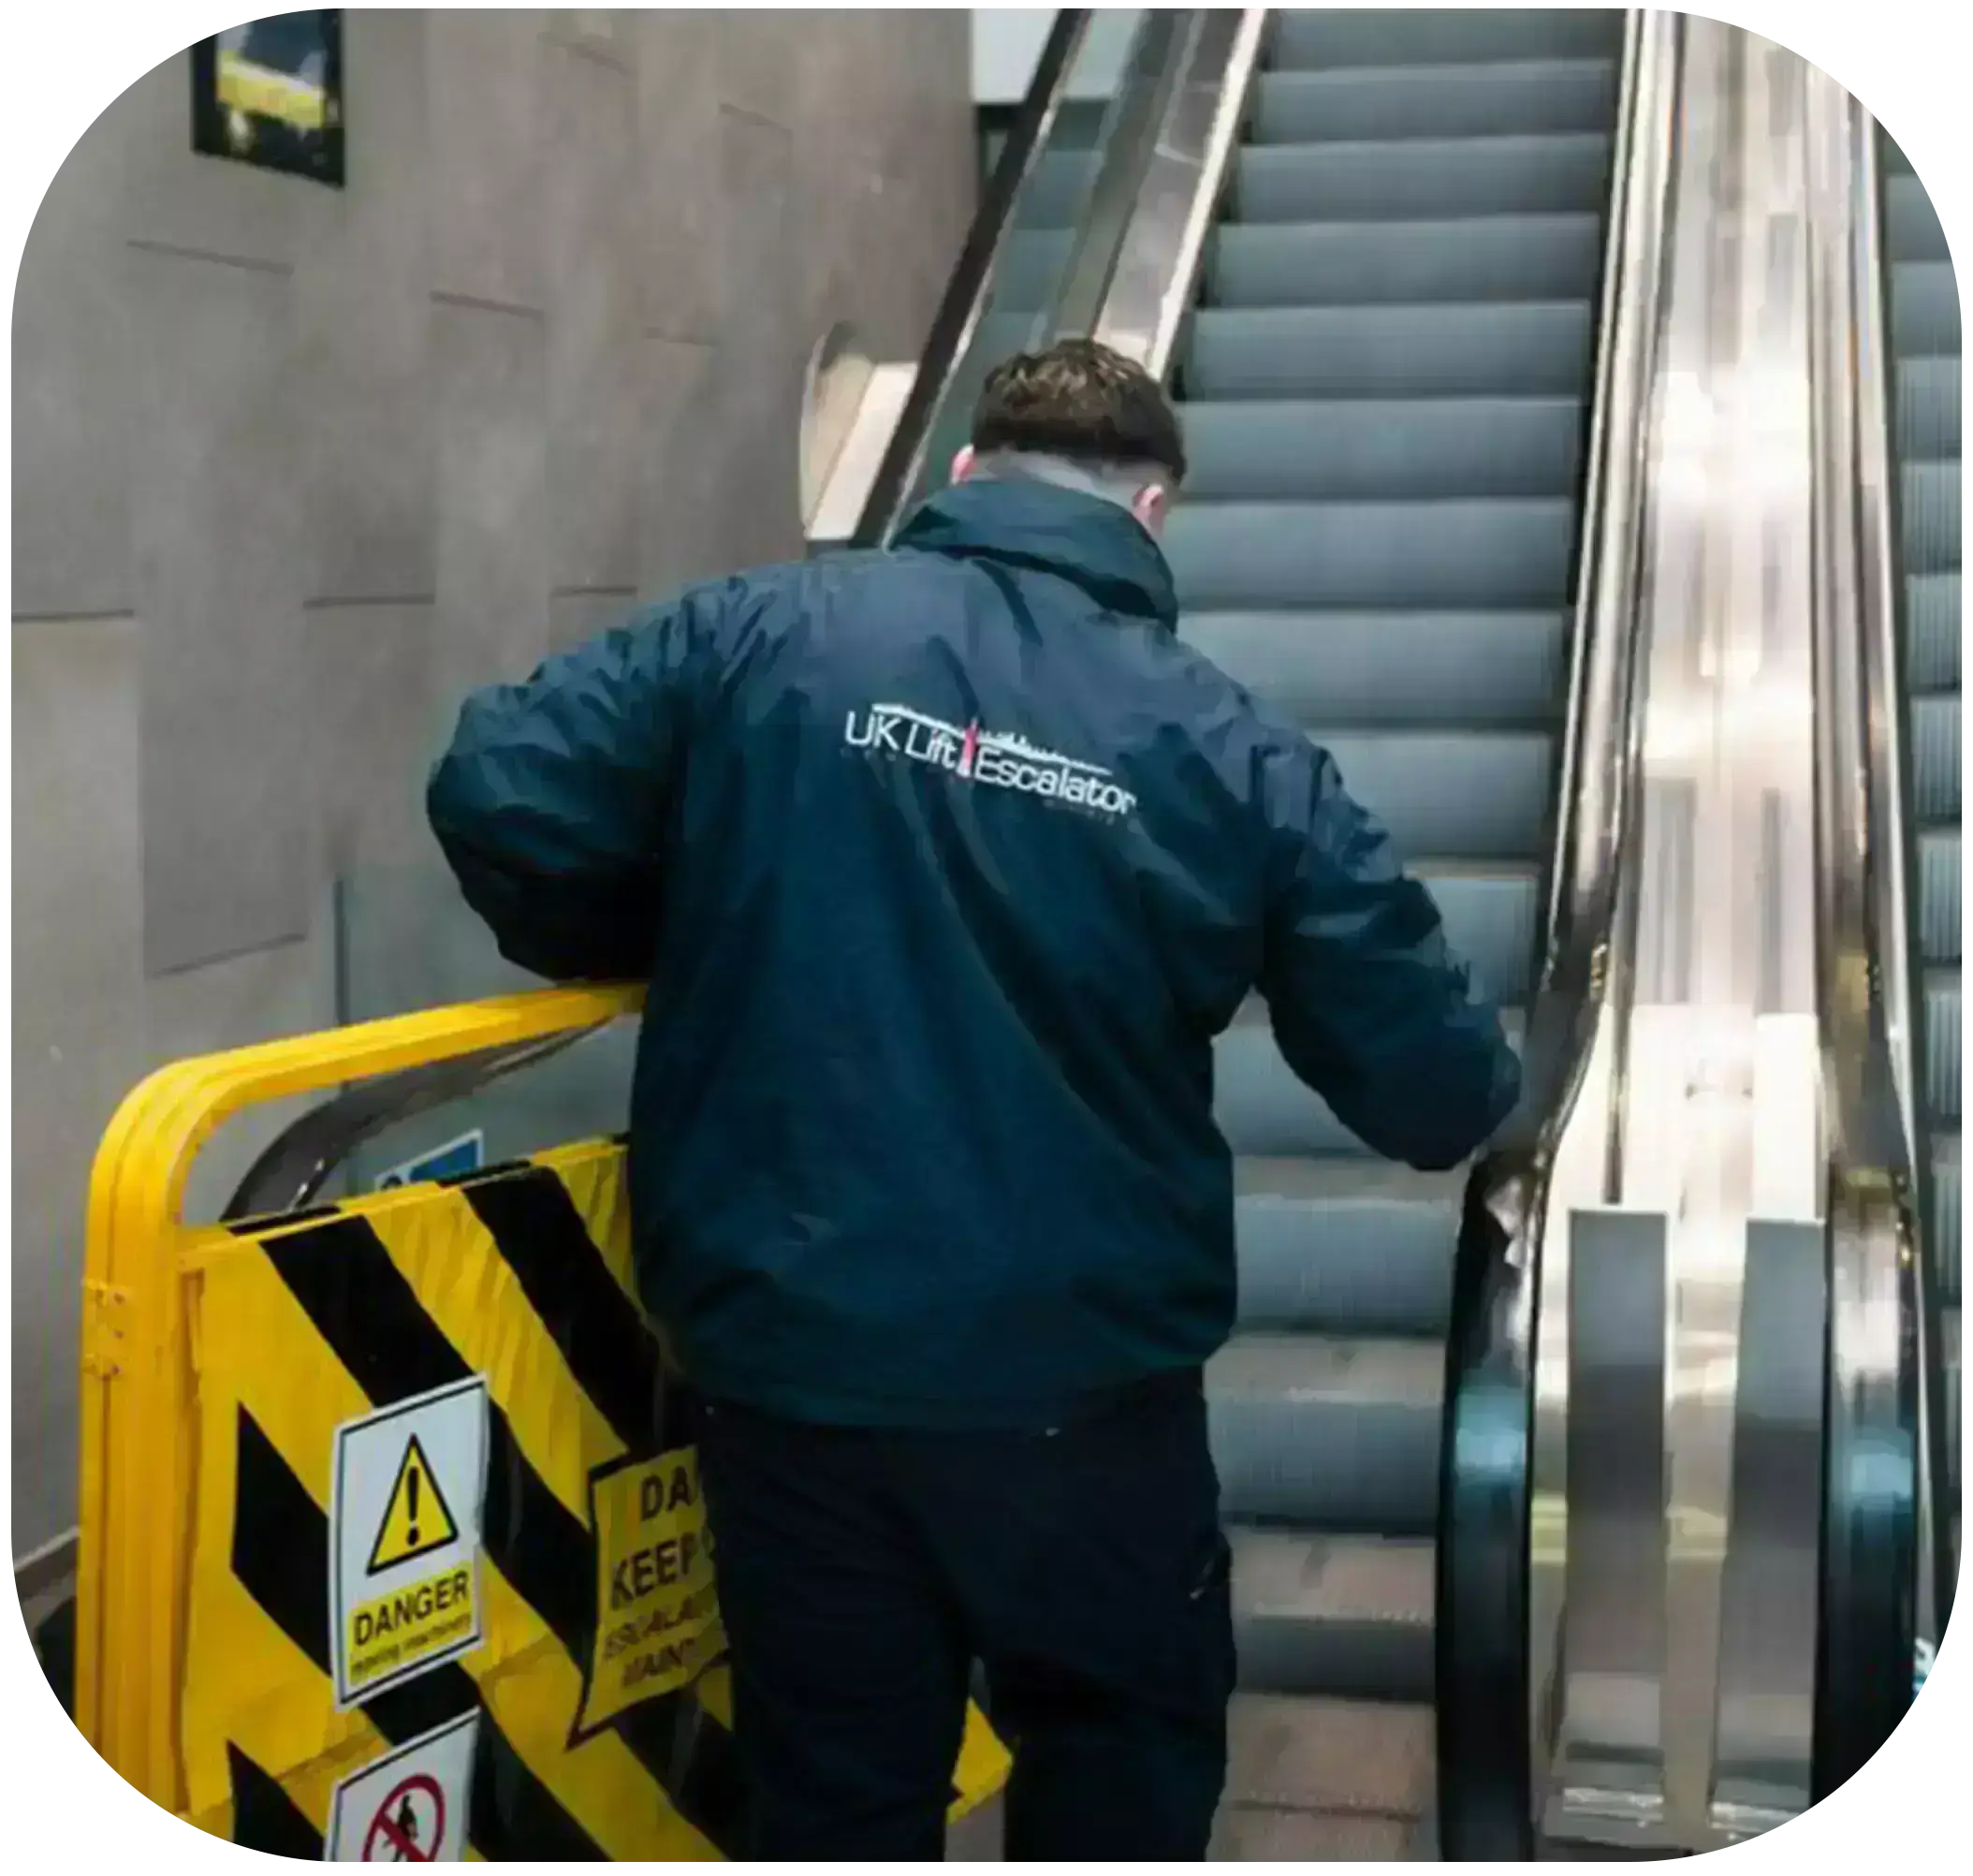 A picture of a man in a blue jacket paired with black pants walking towards the escalator to examine it.